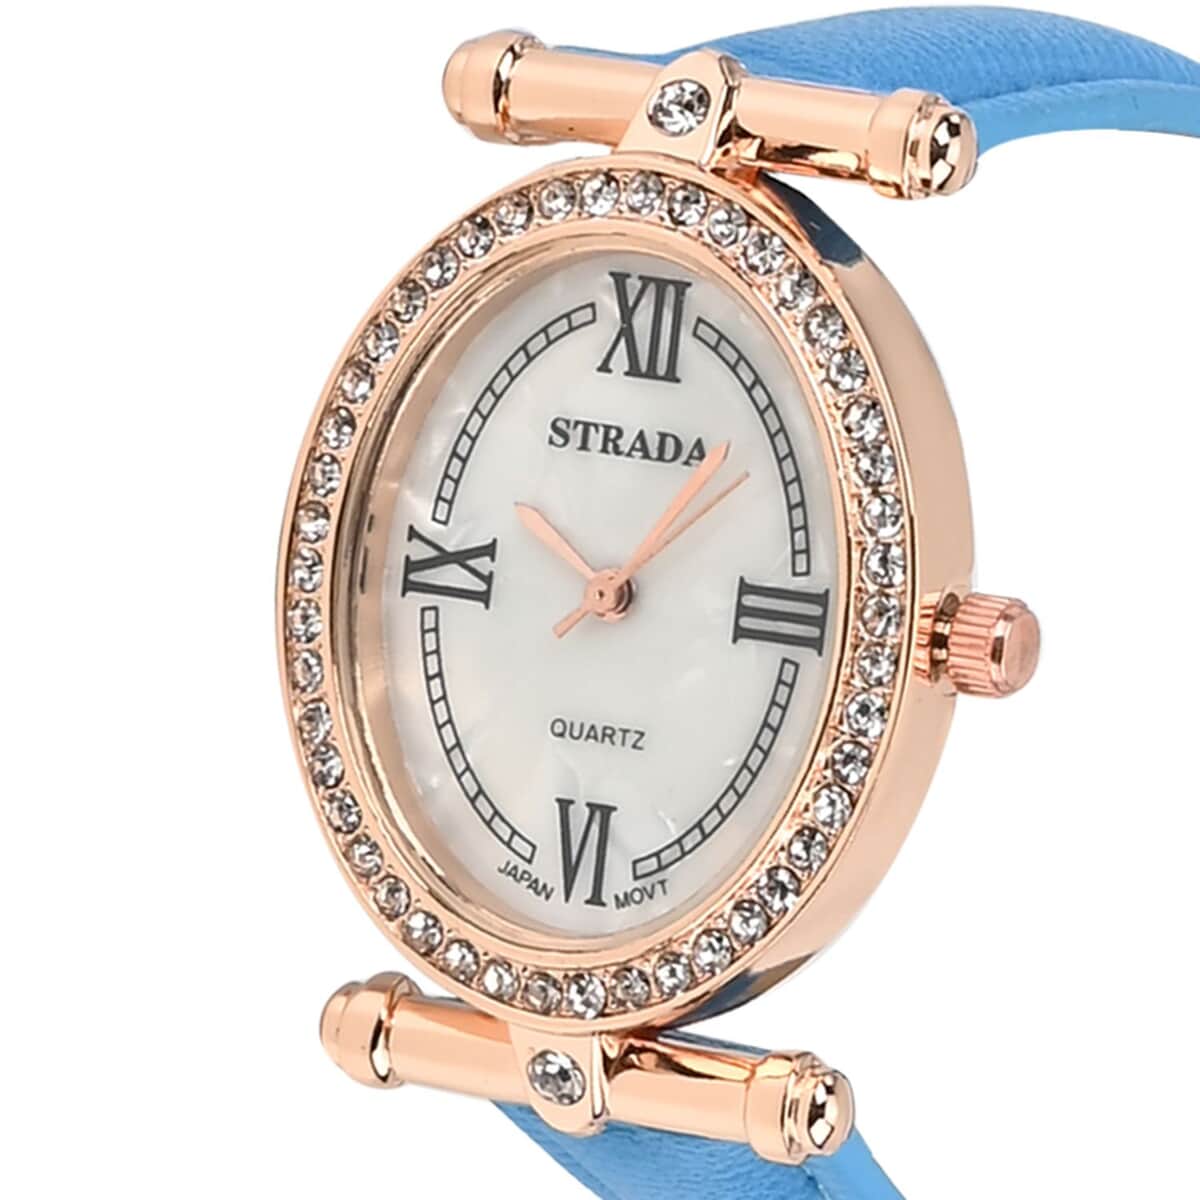 Strada White Austrian Crystal Japanese Movement Watch in Rosetone with Blue Faux Leather Strap (27.94-34.29mm) (6.75-8.50 Inches) image number 3